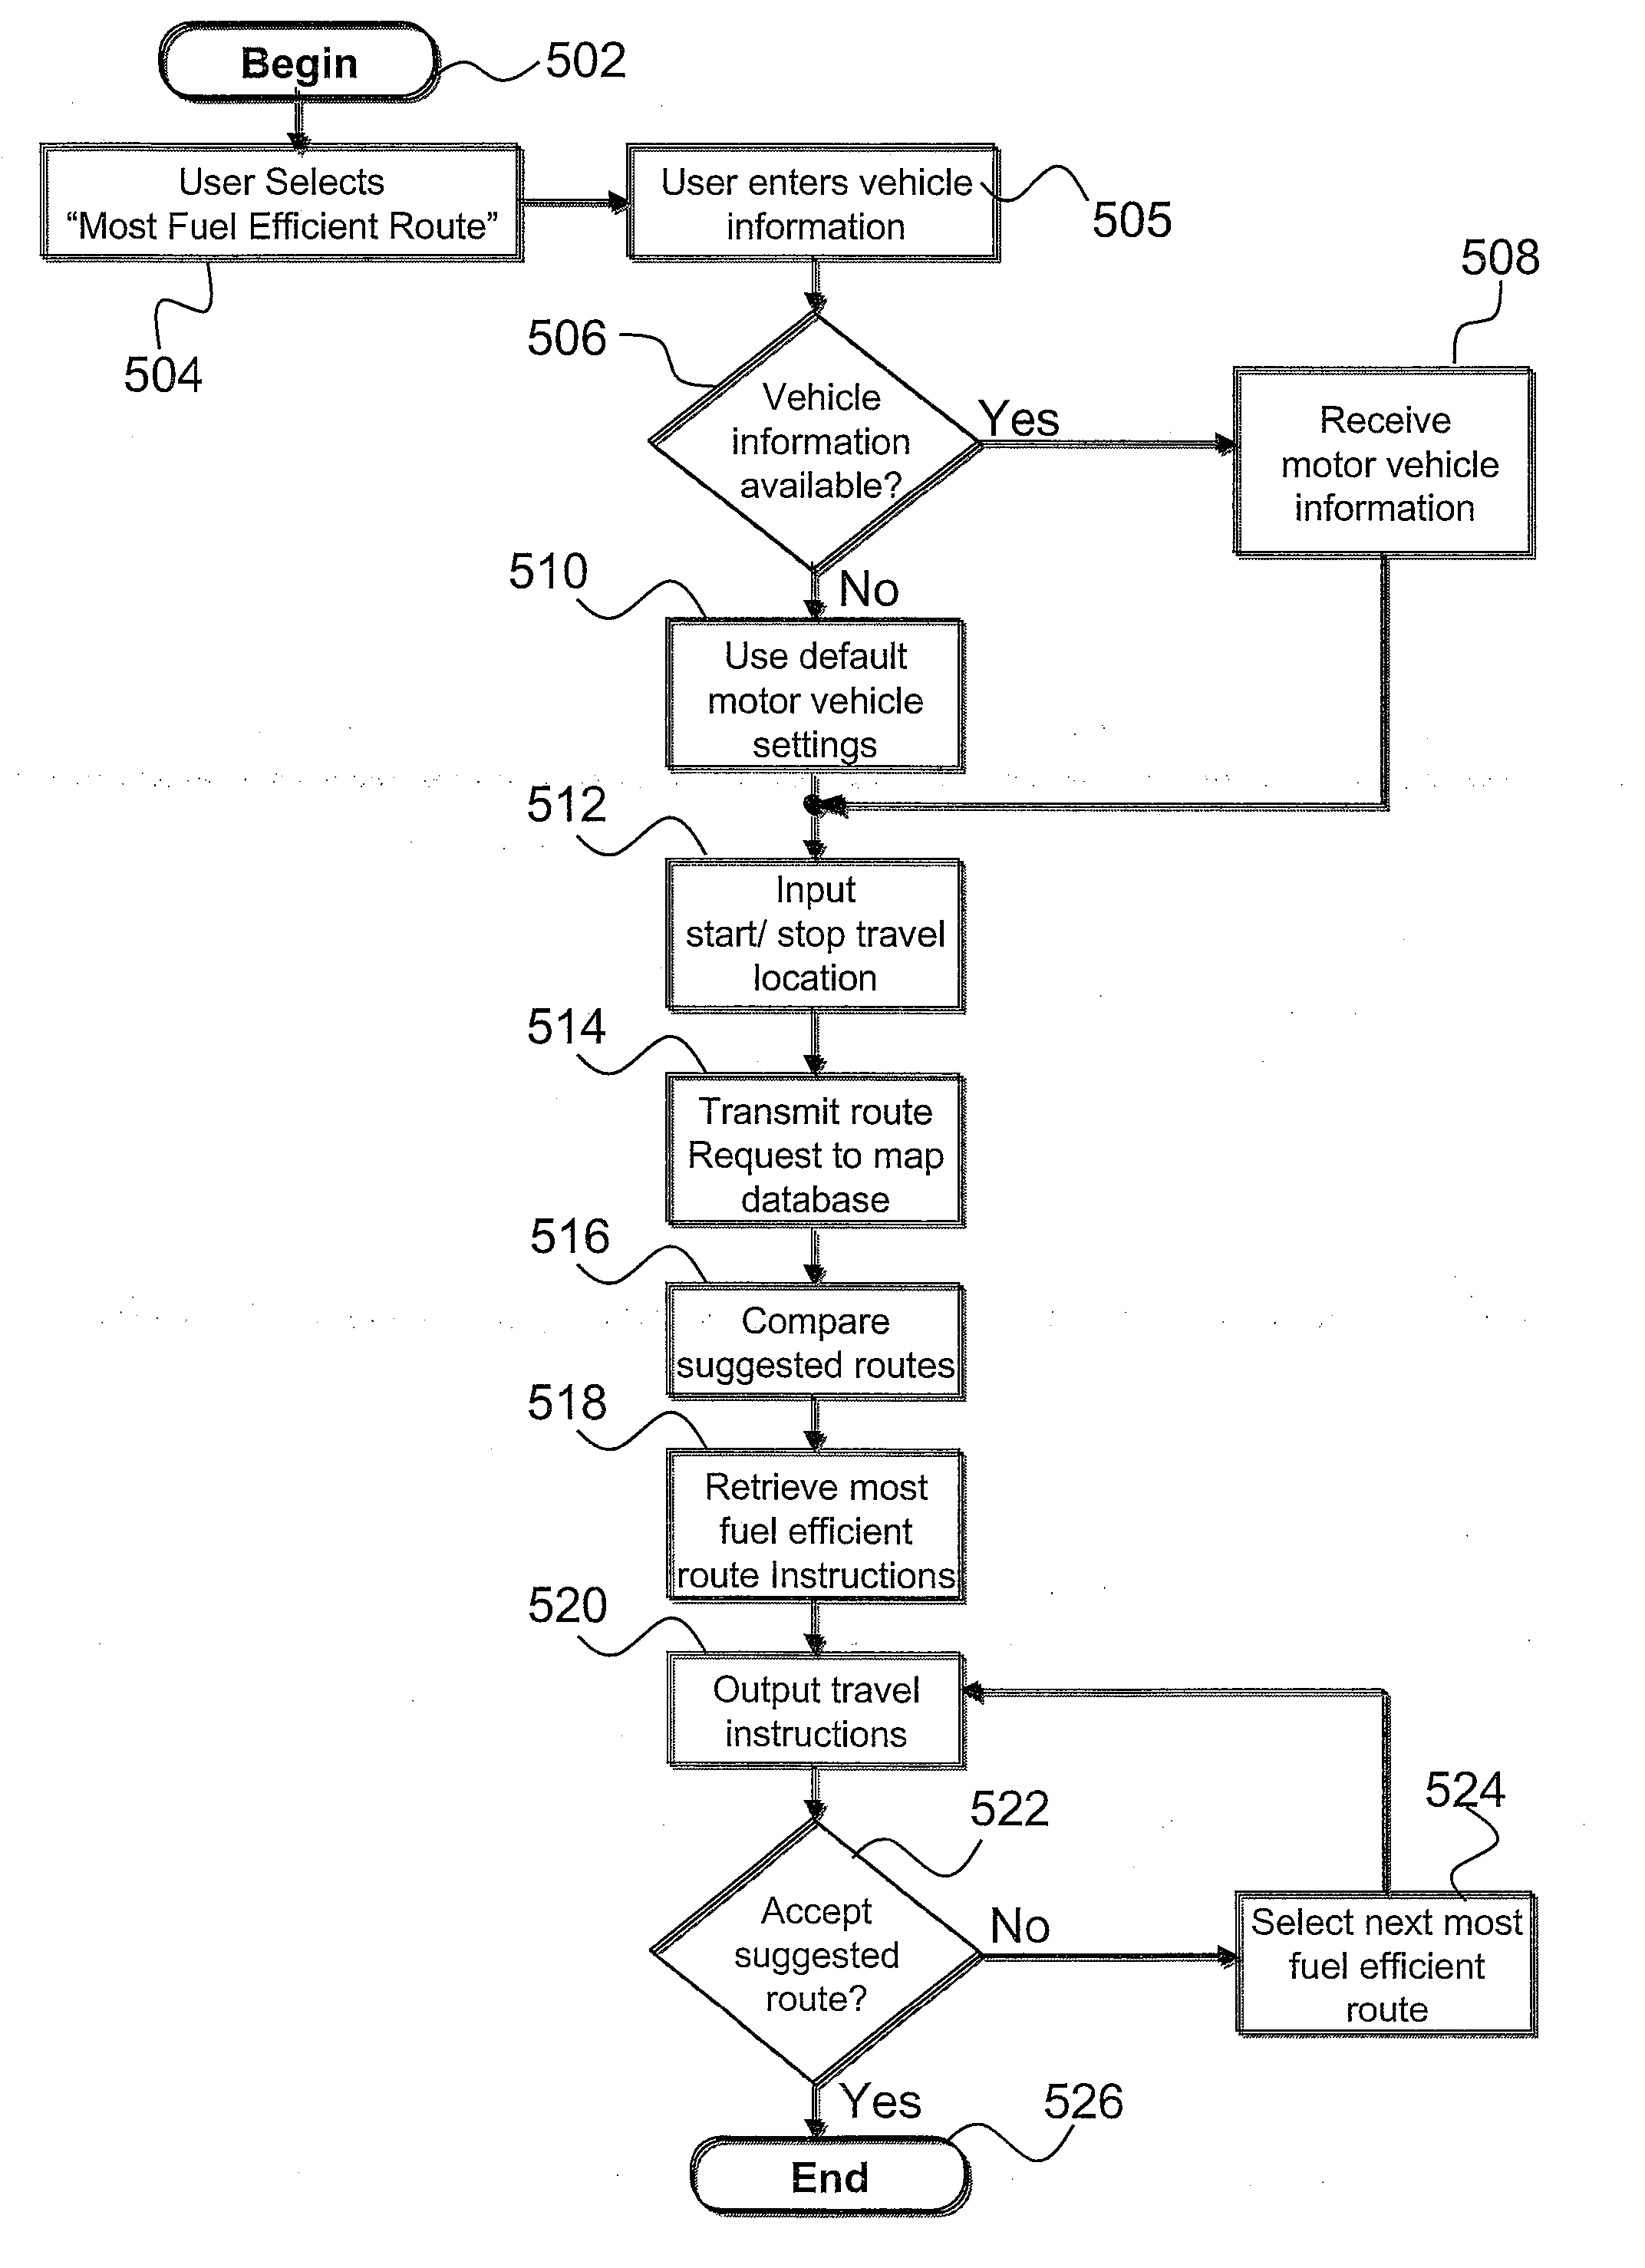 Method for determining and outputting travel instructions for most fuel-efficient route